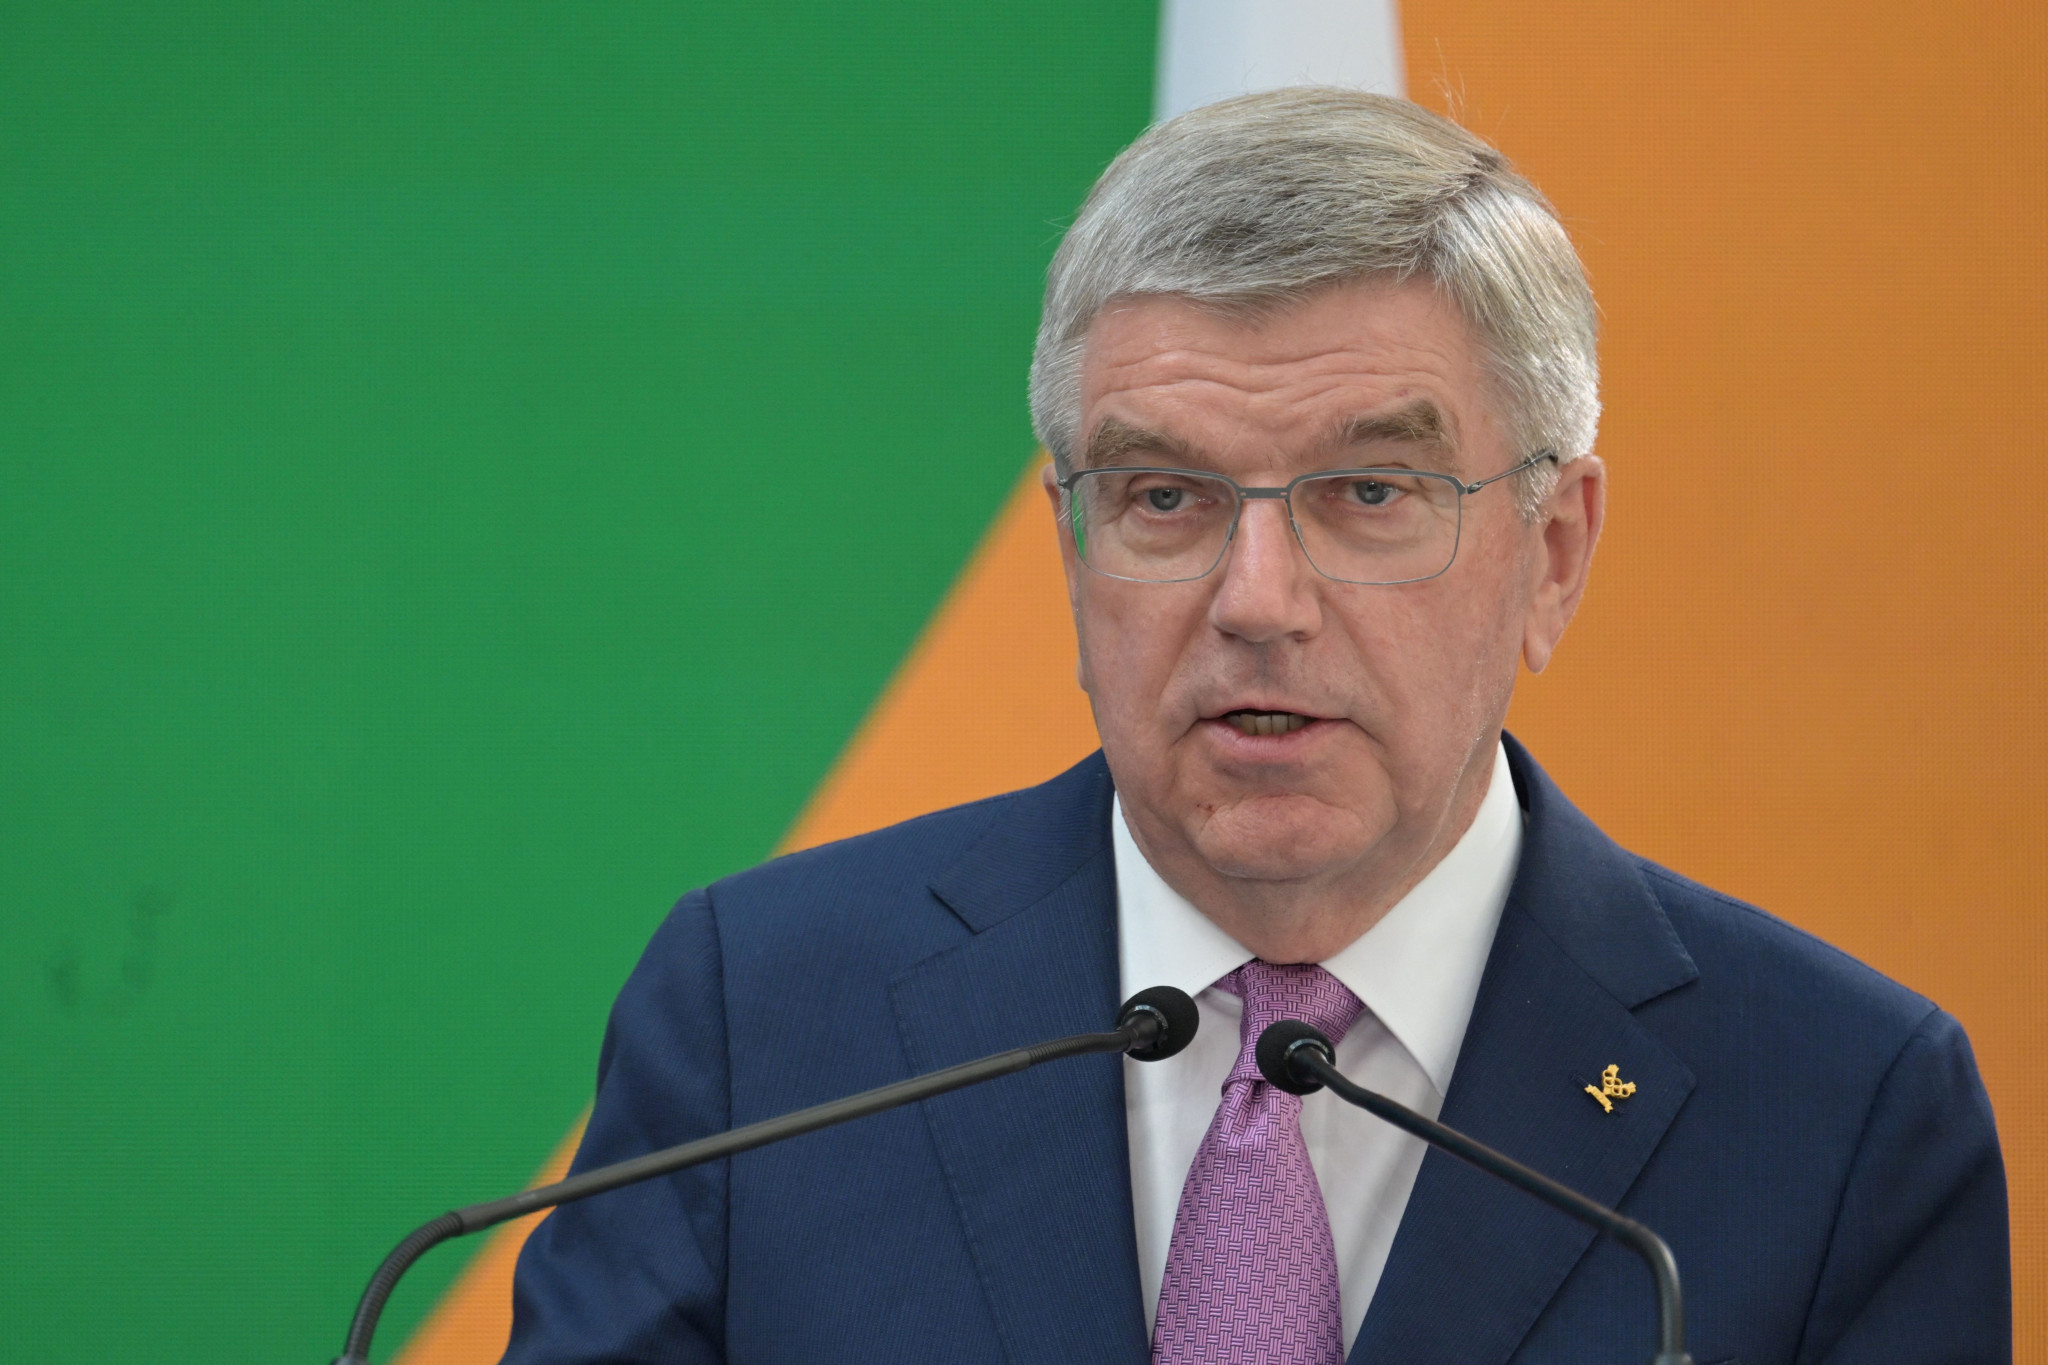 Thomas Bach has suggested he would vote for cricket to be included at Los Angeles 2028 ©Getty Images